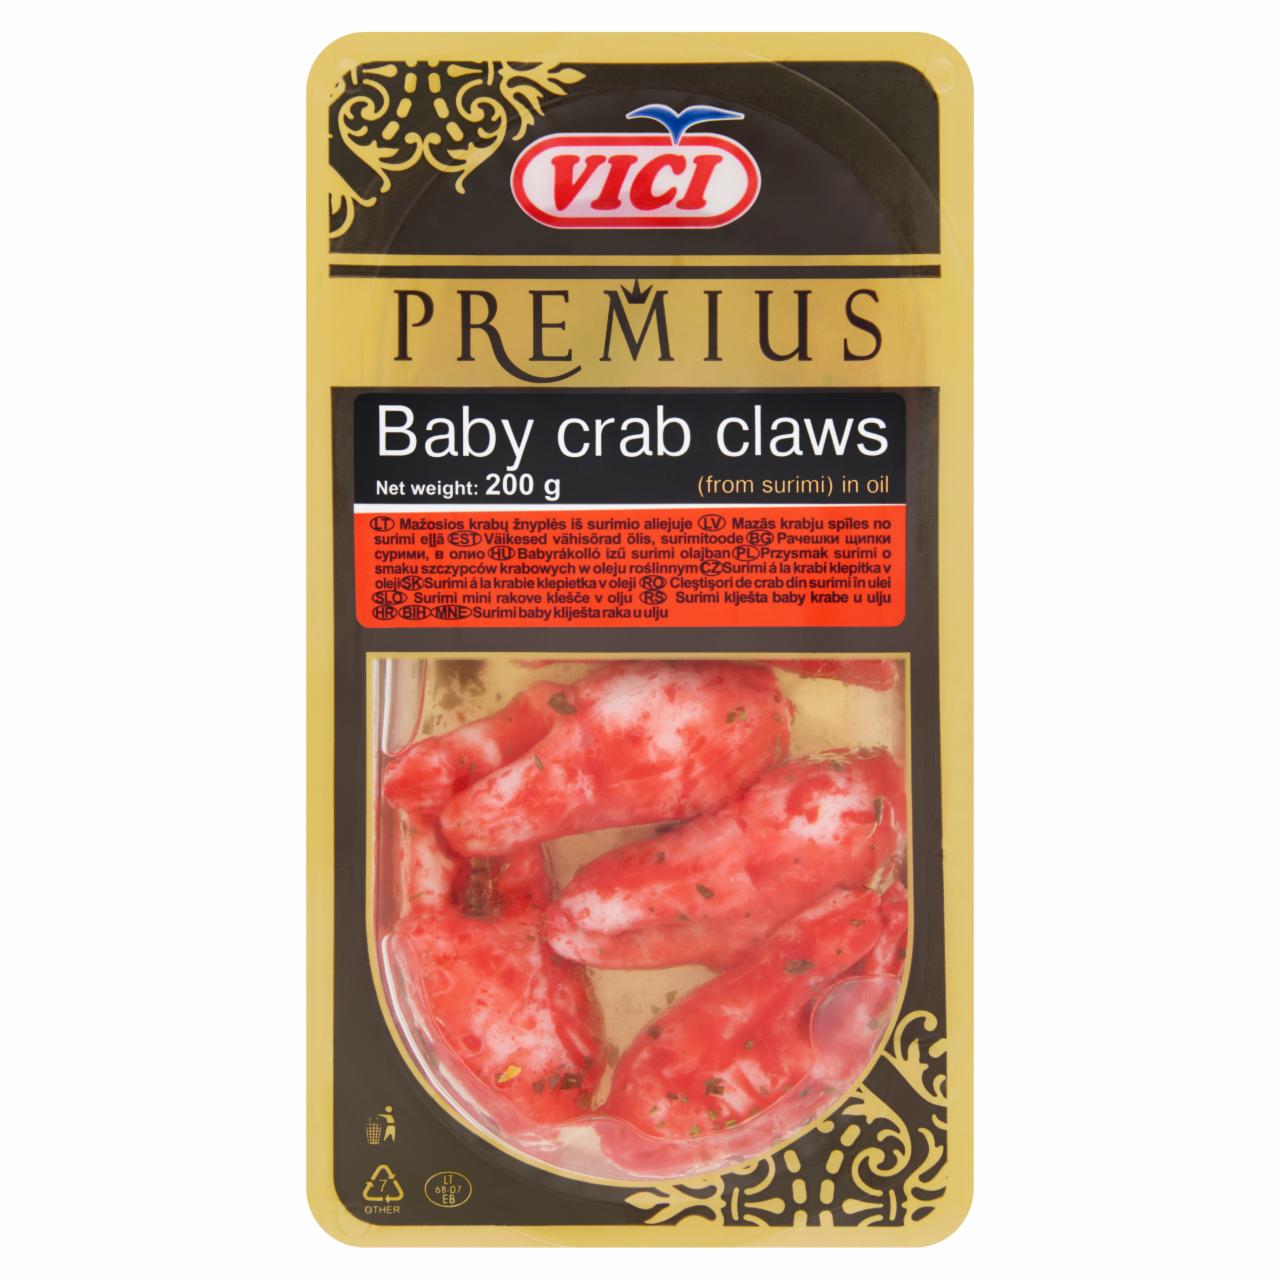 Photo - Vici Premius Baby Crab Claws from Surimi in Oil 200 g